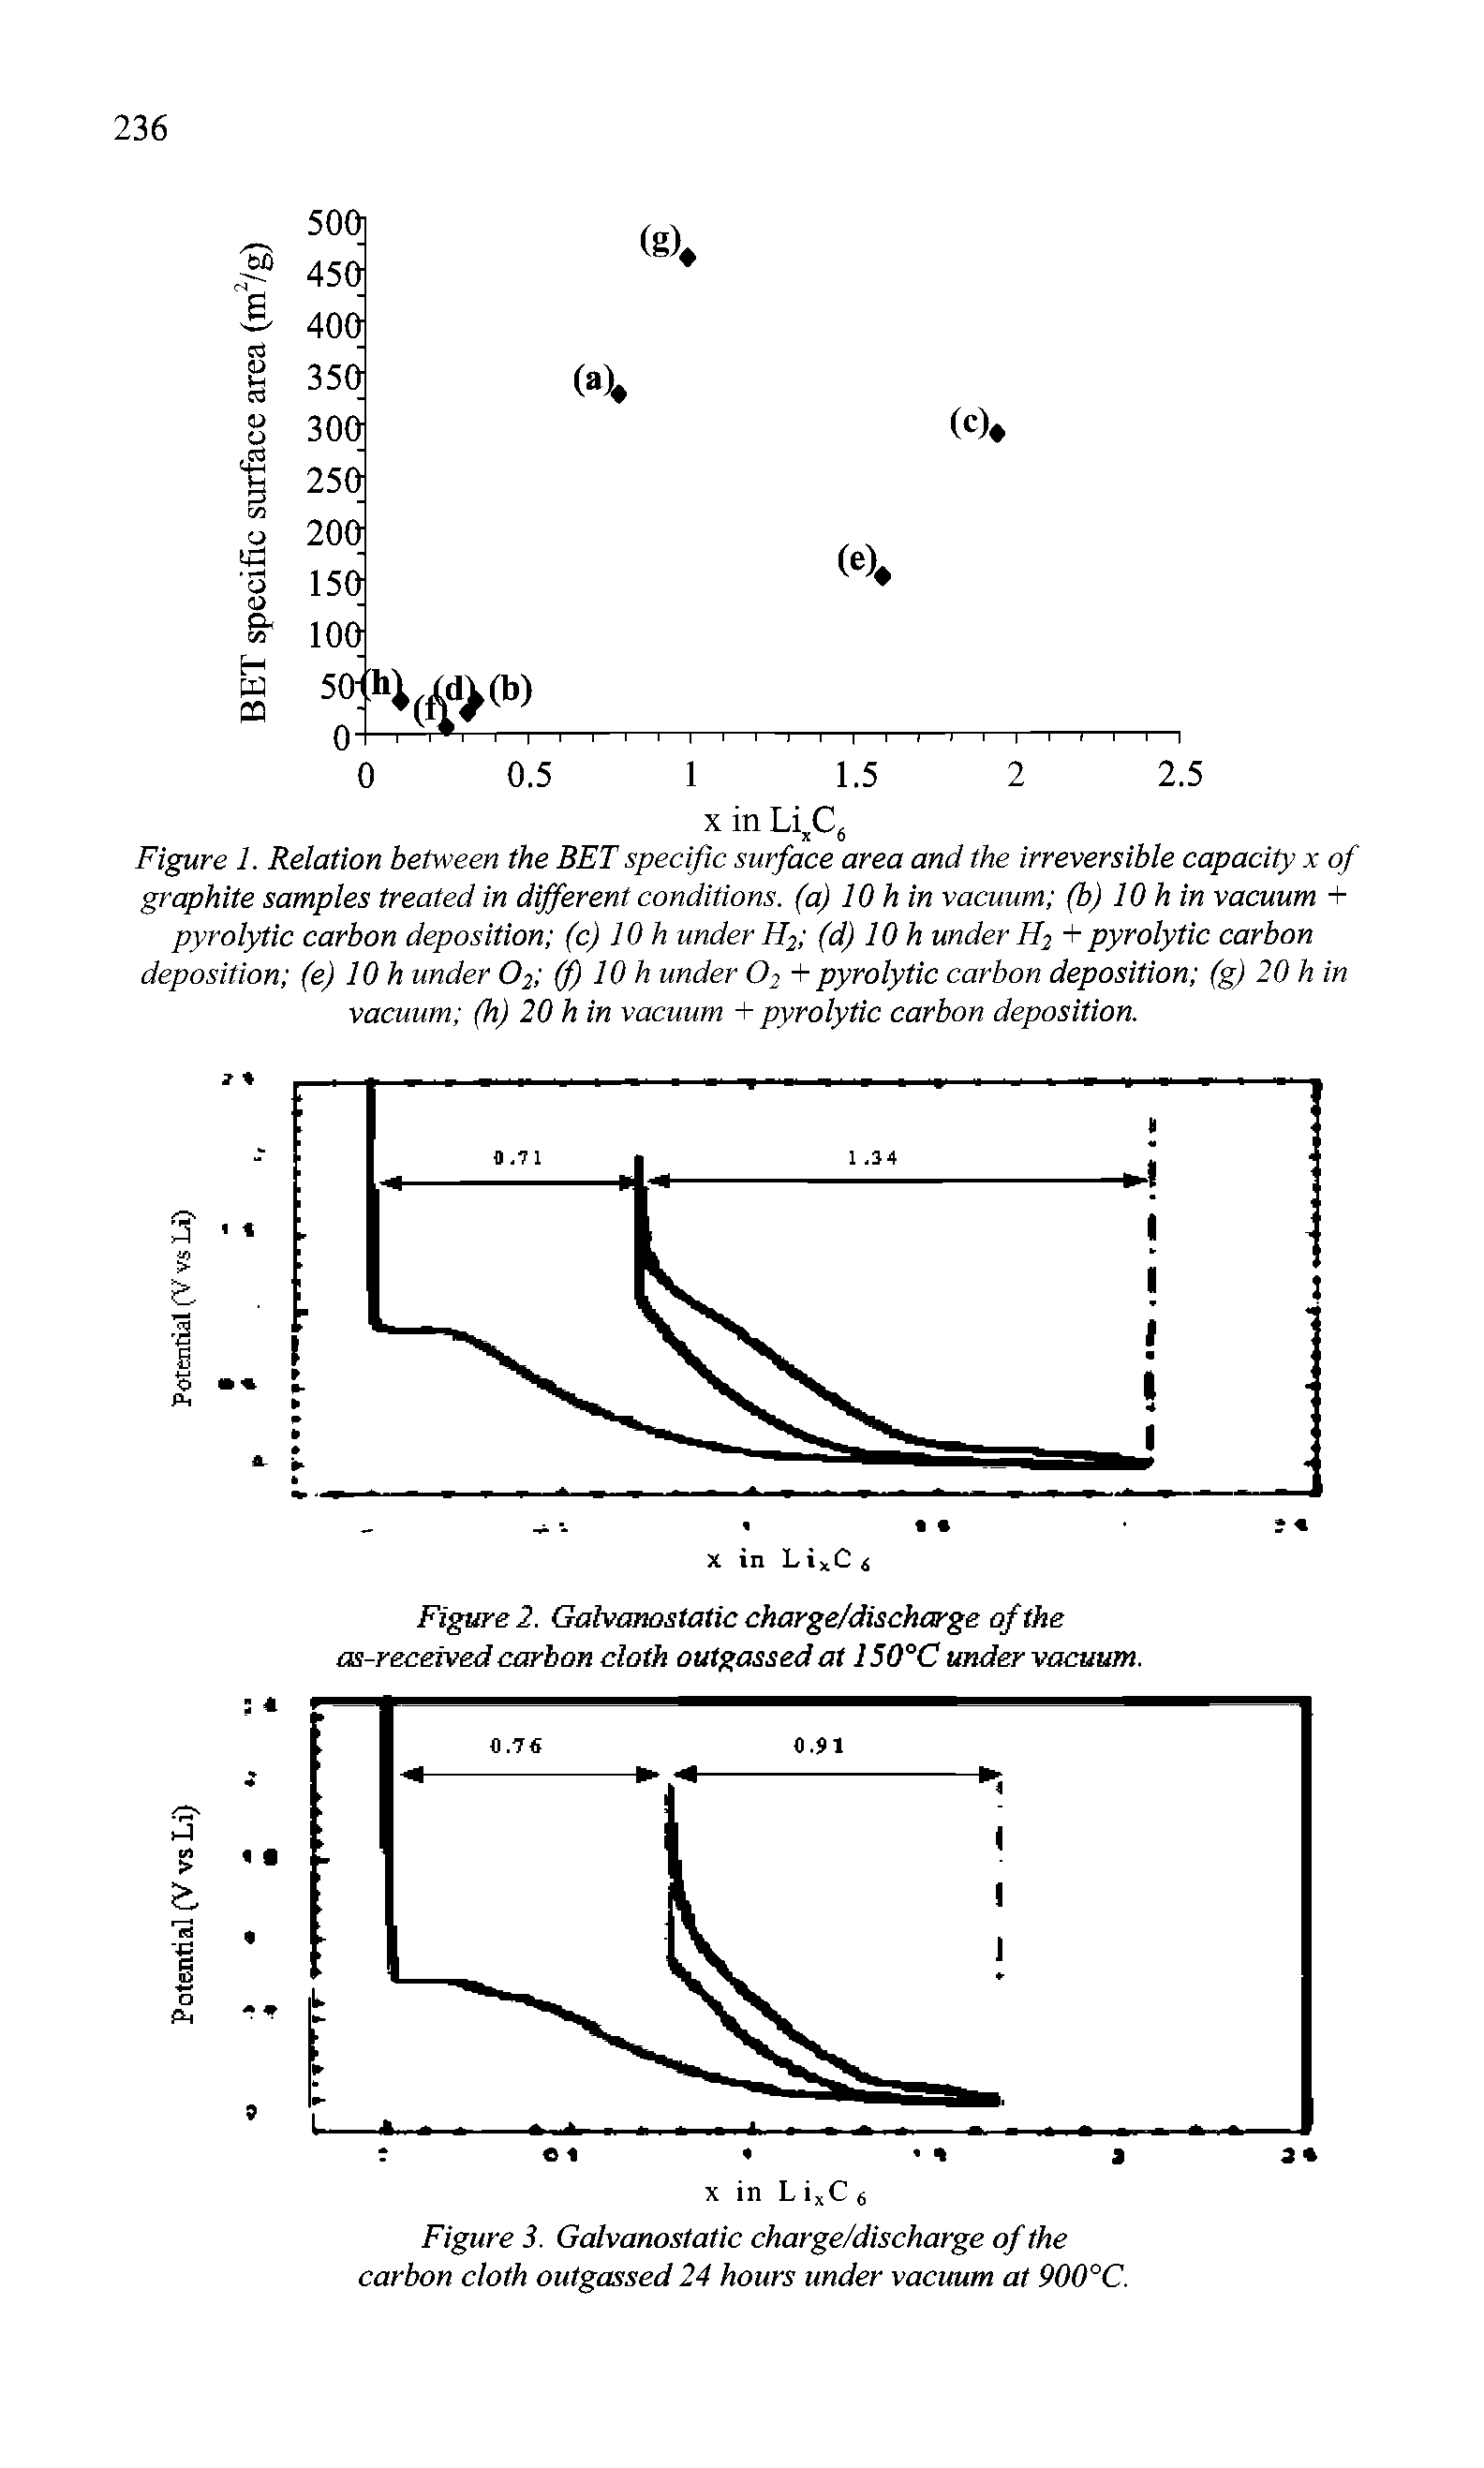 Figure 2. Galvanostatic charge/discharge of the as-received carbon cloth outgassed at 150°C under vacuum.